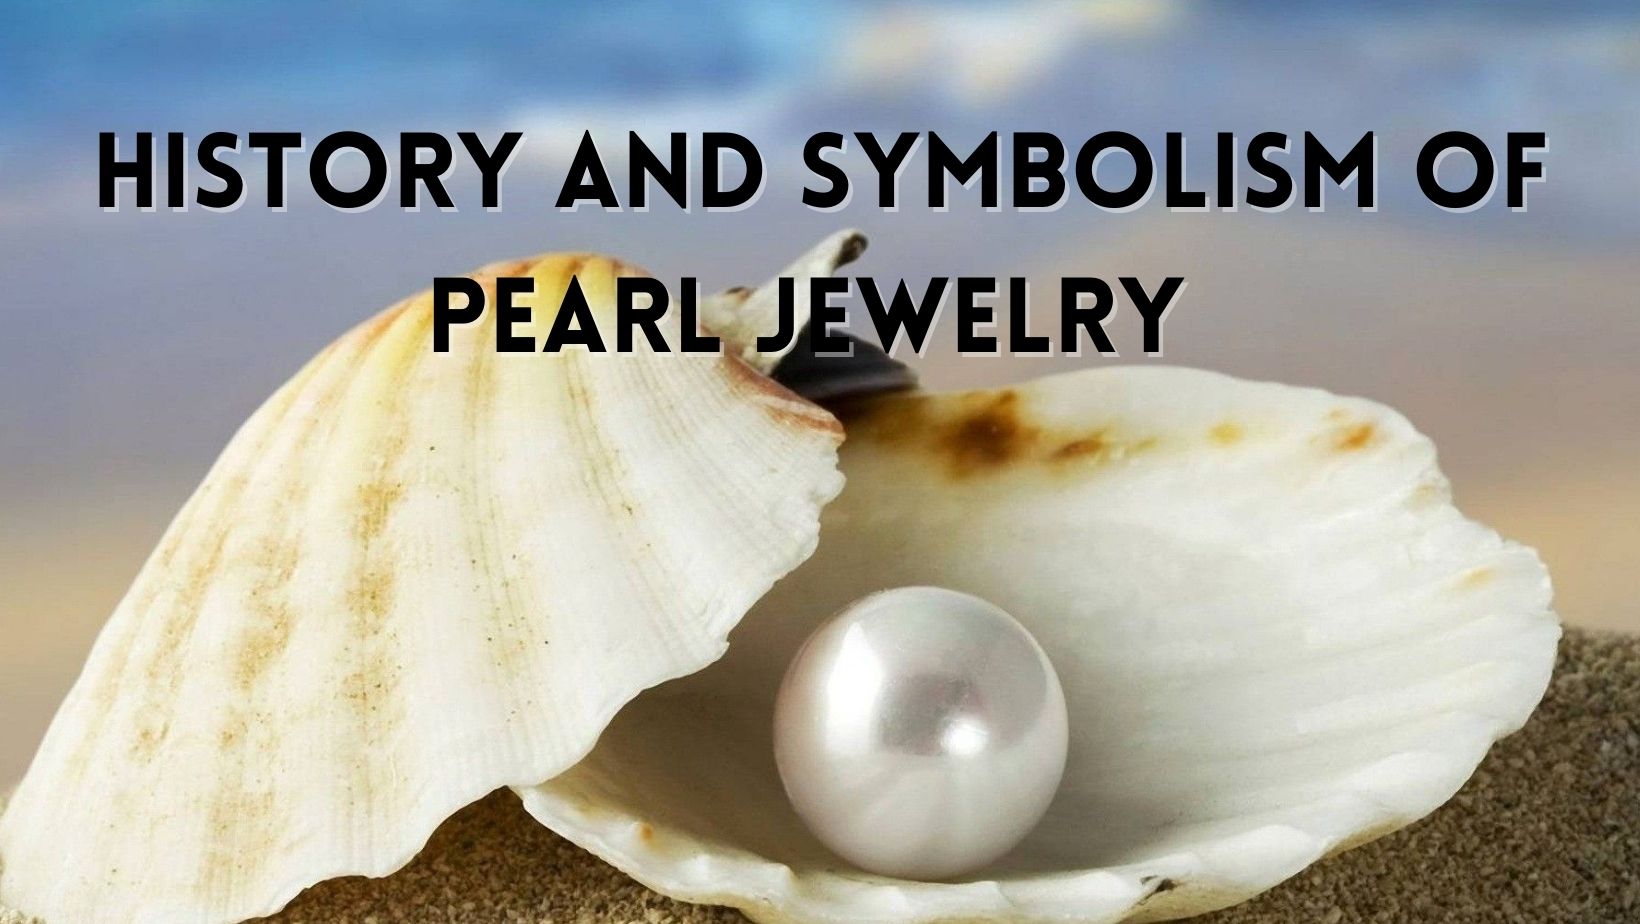 Amusing meaning of pearls